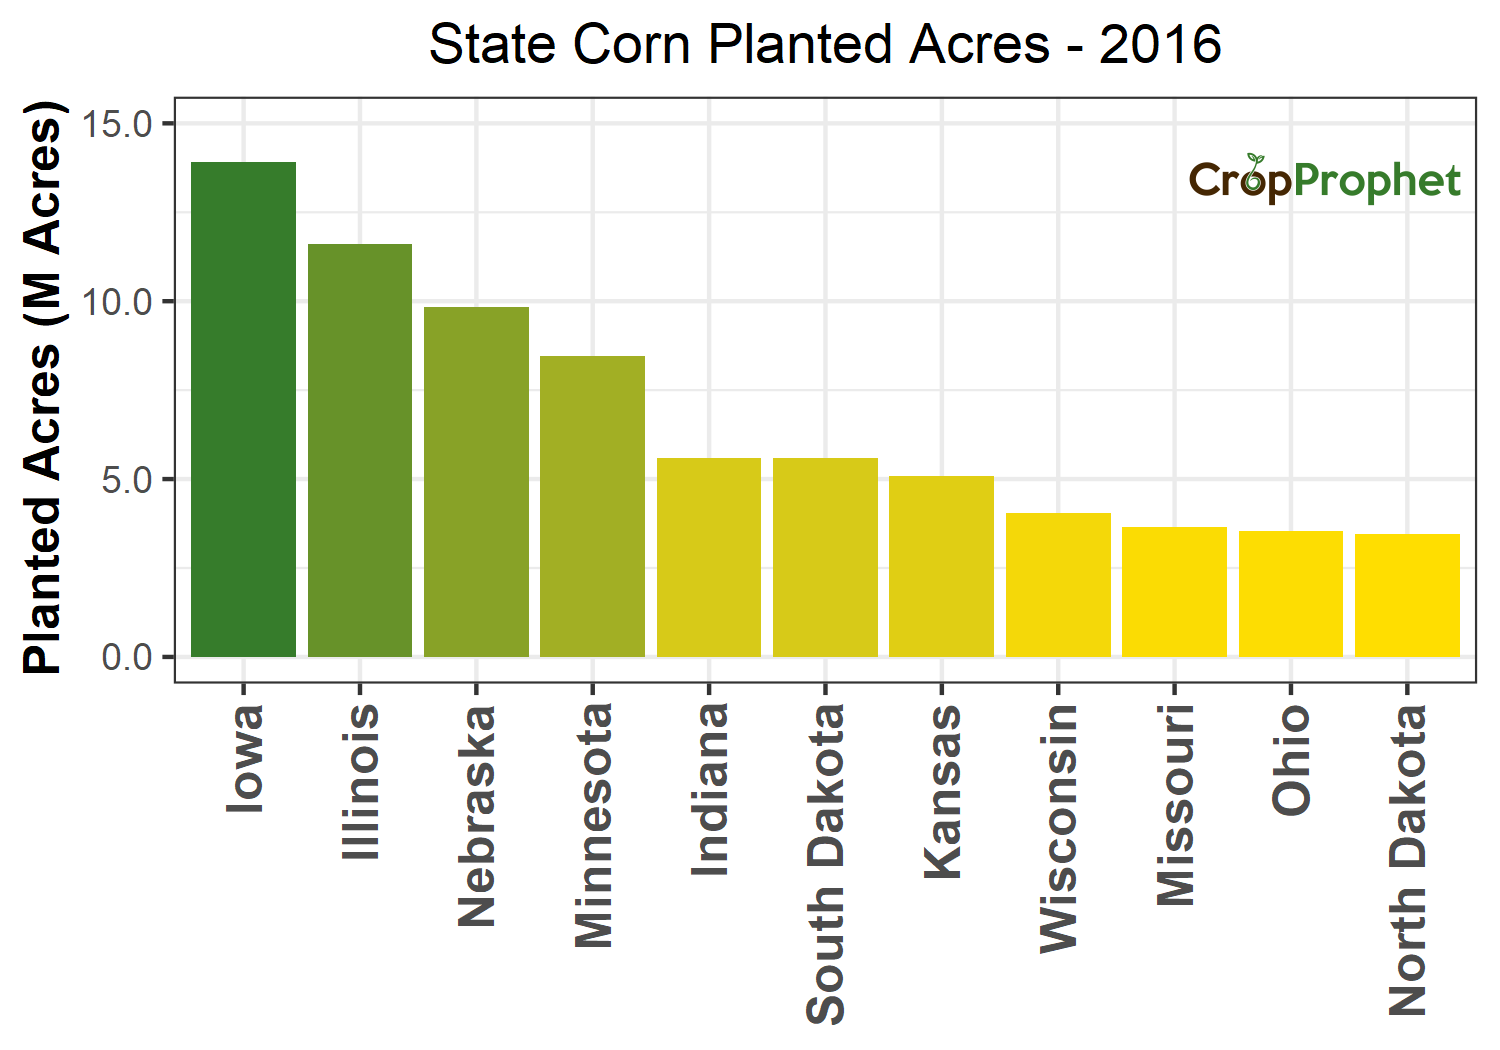 Corn Production by State - 2016 Rankings